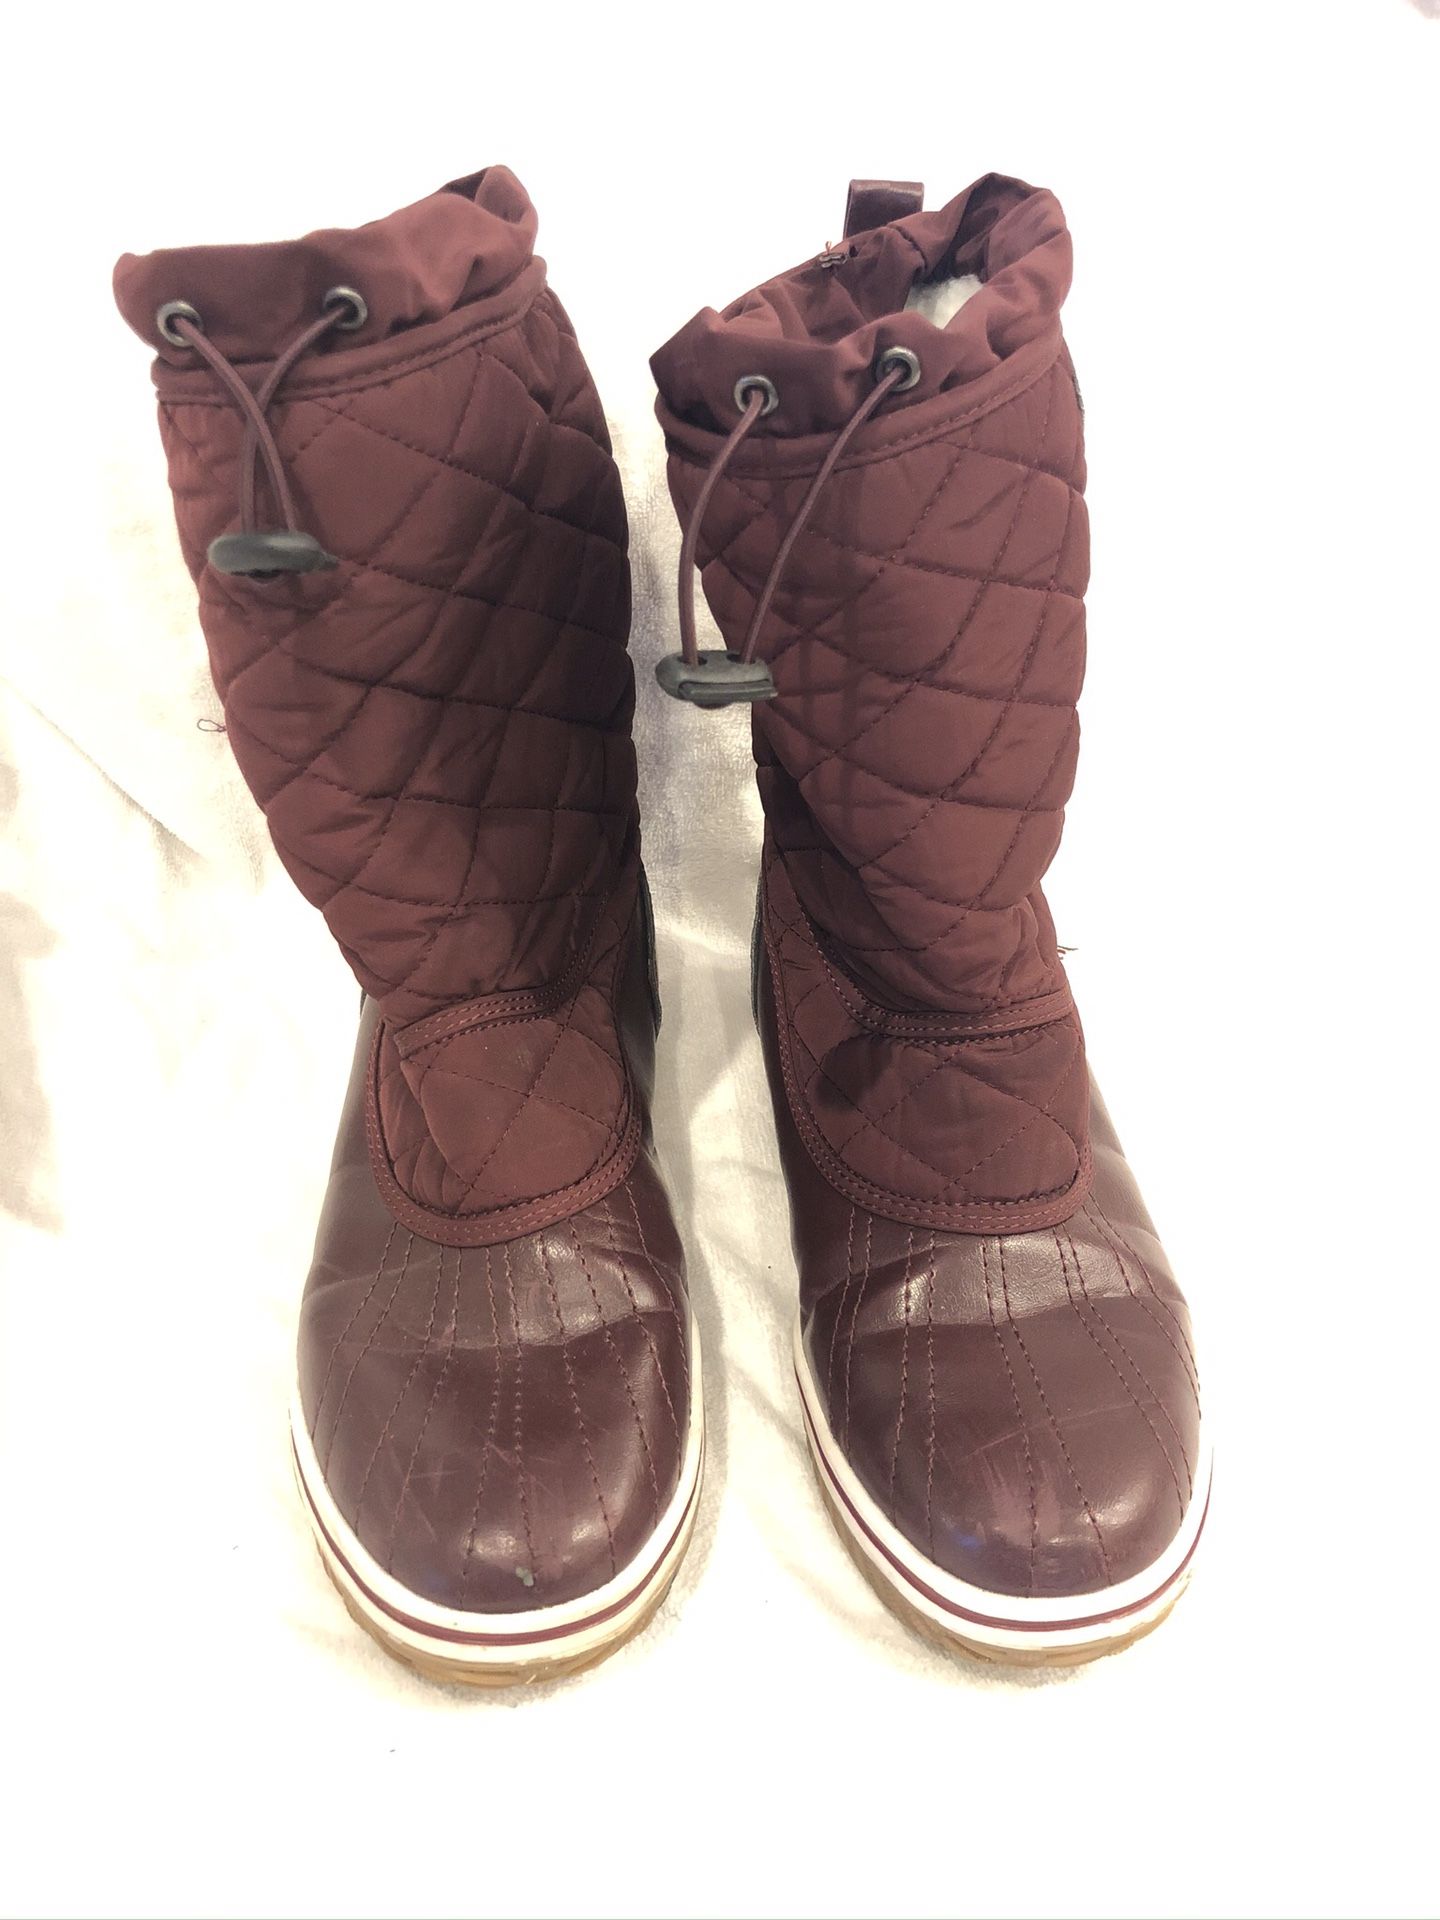 Refresh Women's Burgundy Duck Rain Boots Booties Winter Rain Snow Mid Calf Sz8 In good condition with a few scuff marks.